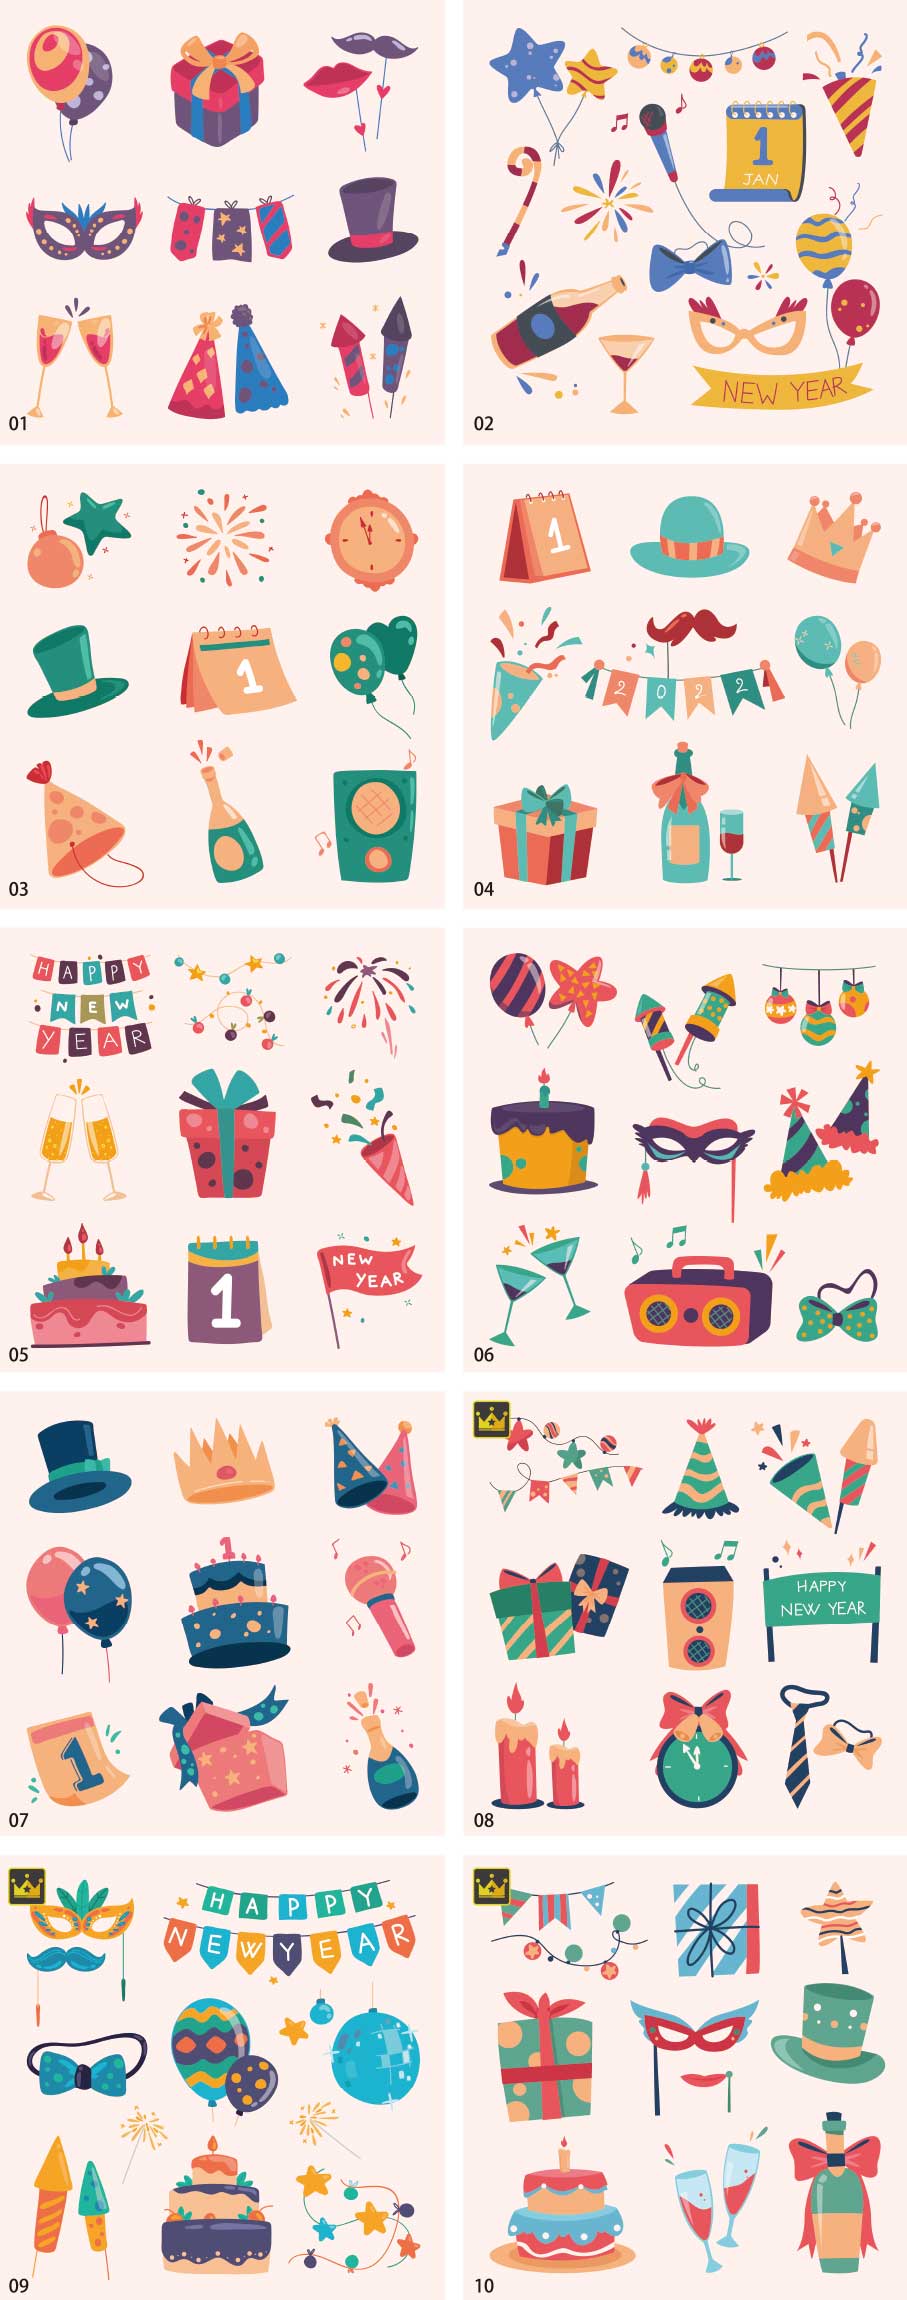 New Year Illustration Collection